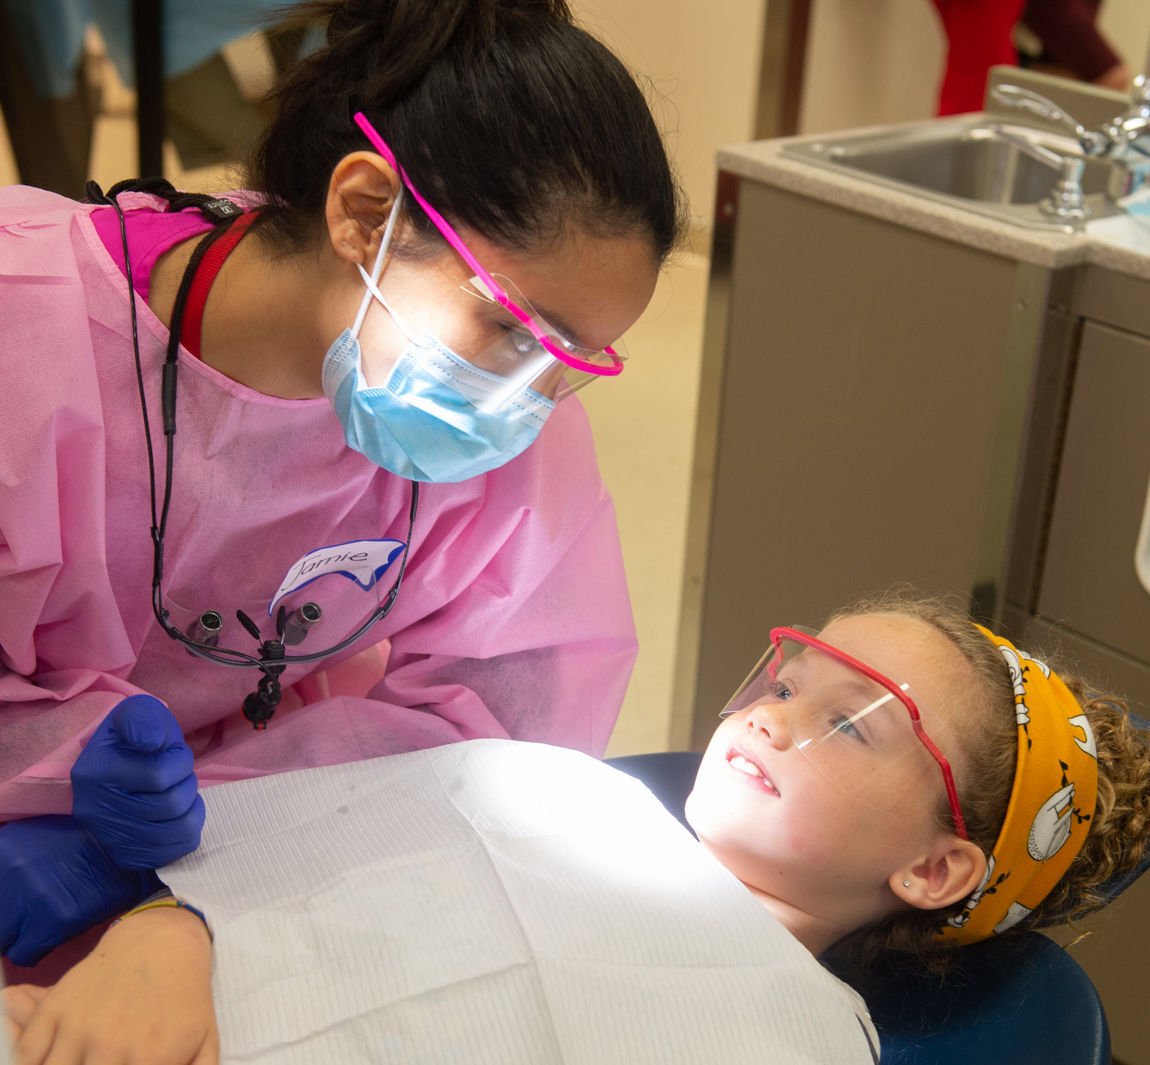 Give Kids a Smile Day offers children free quality dental care